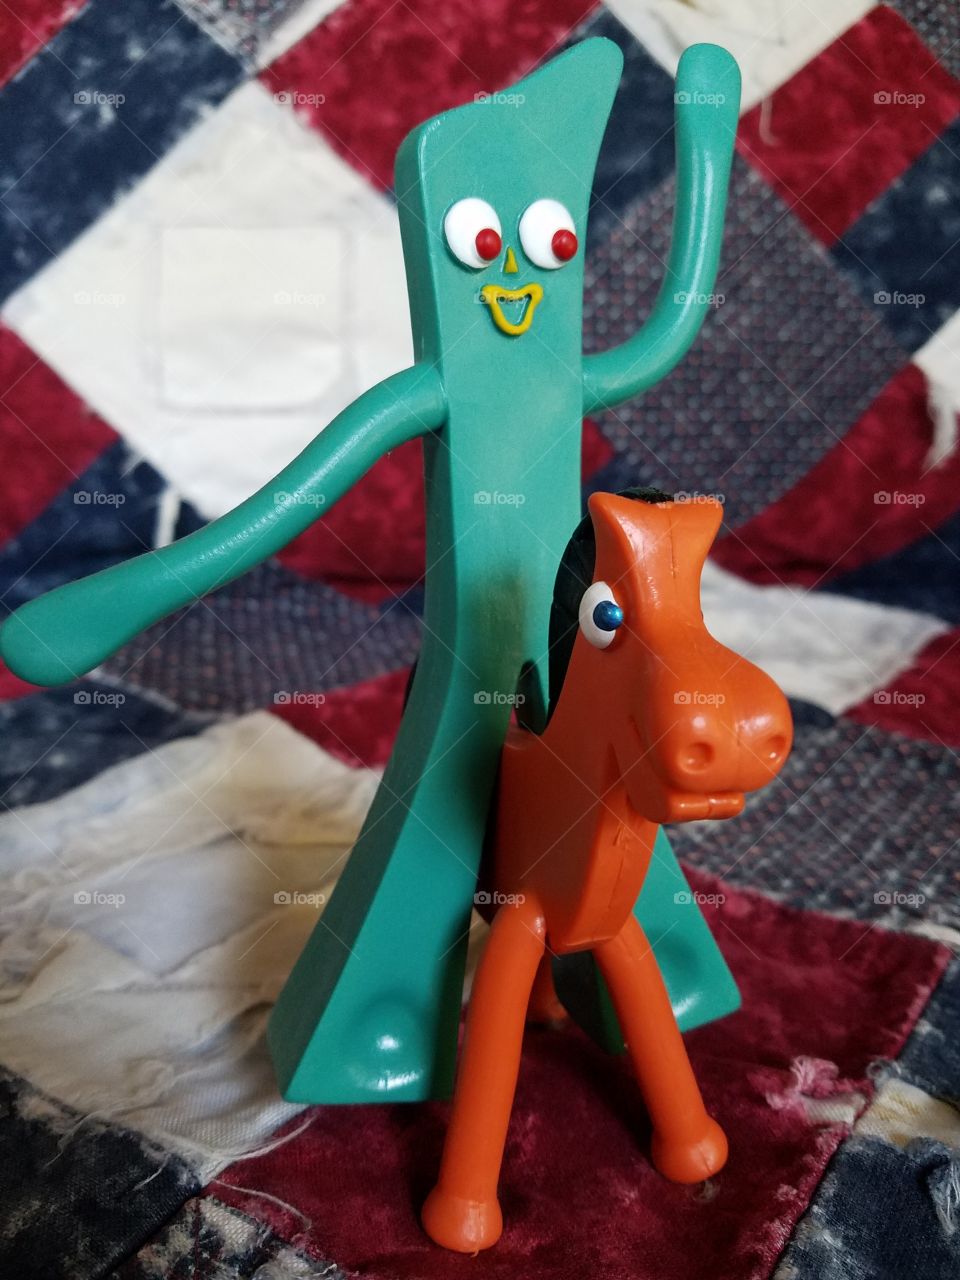 Gumby and Pokey figurines